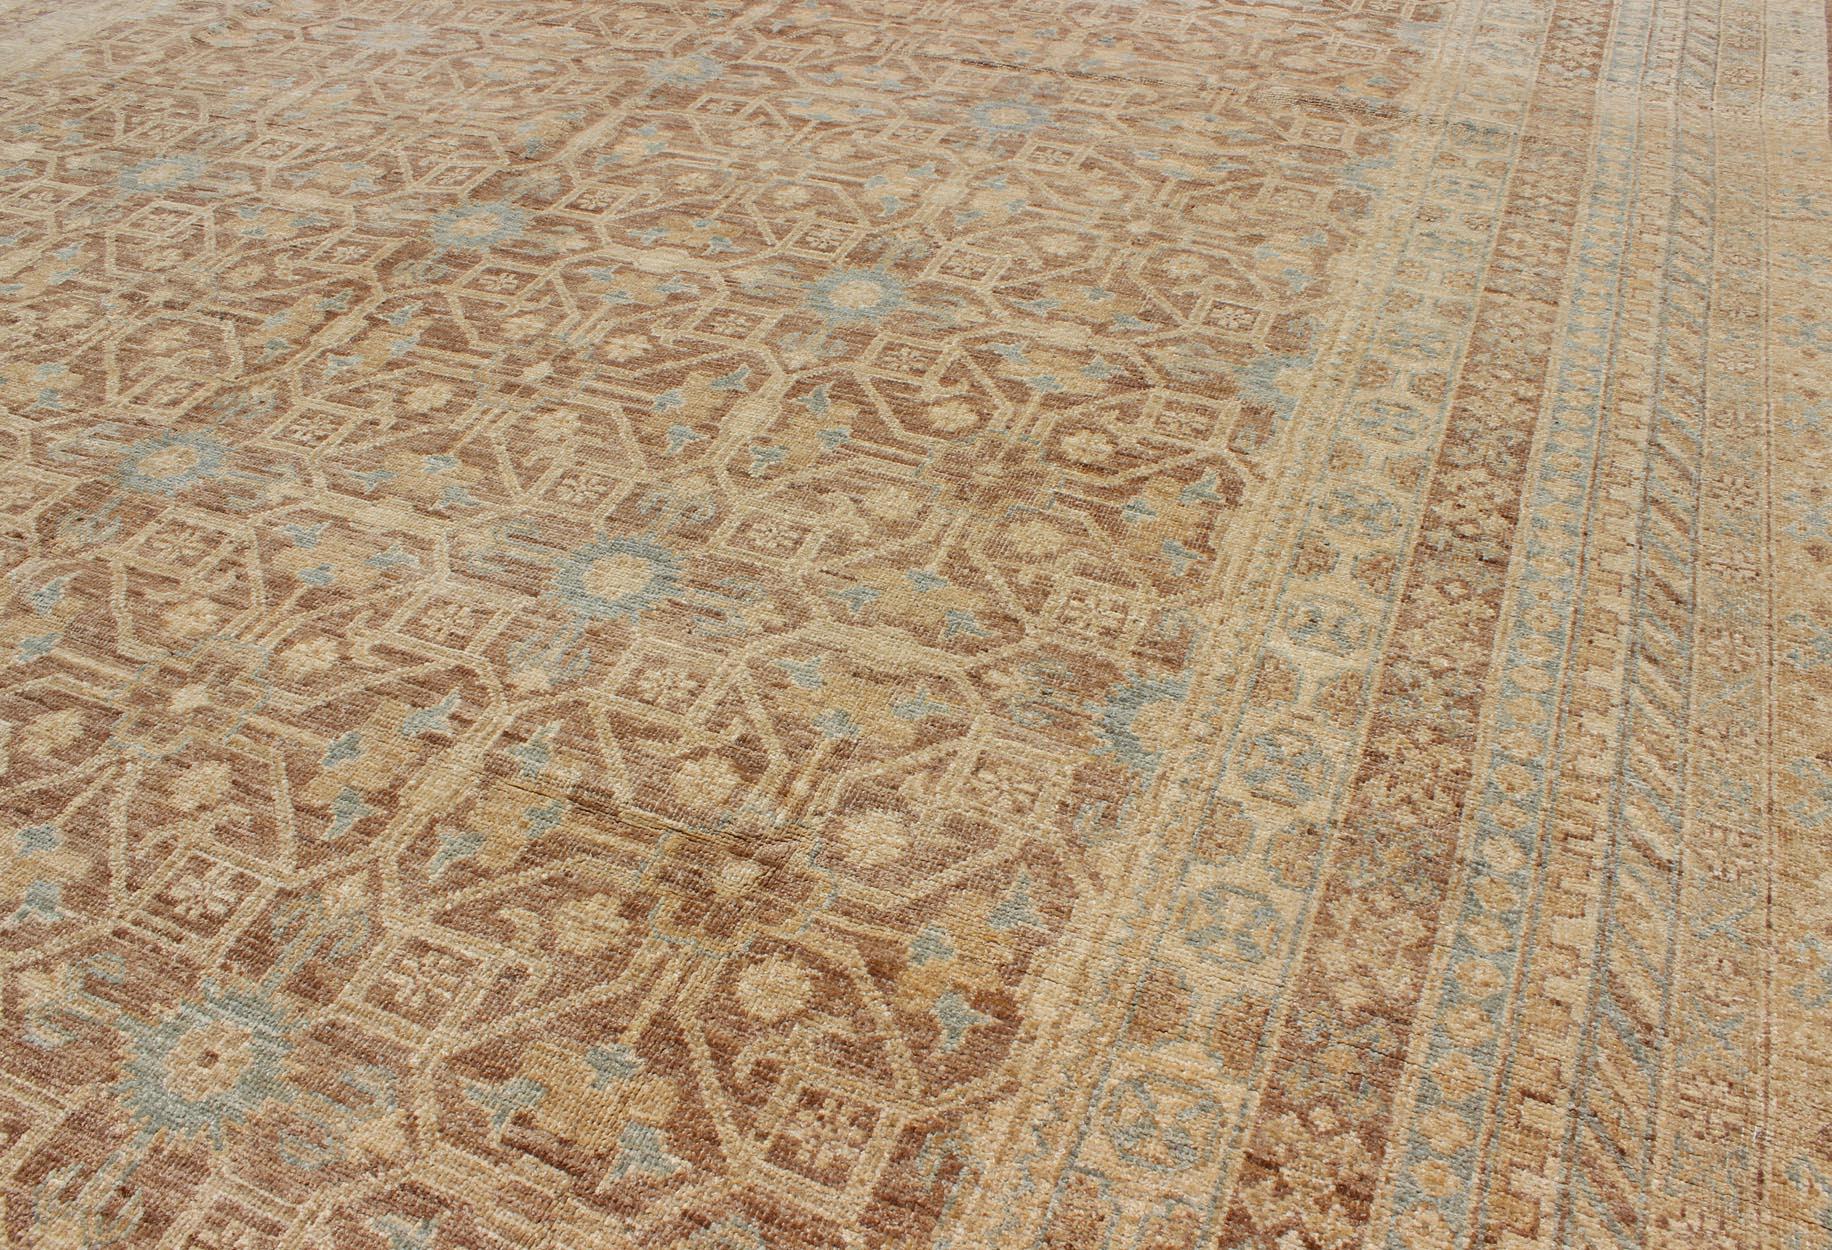 This Khotan features a geometric all-over design flanked by a repeating pattern in the border. The entirety of the piece is rendered in light neutral tones, which makes it a versatile rug, well-suited for a variety of interiors. Colors included are